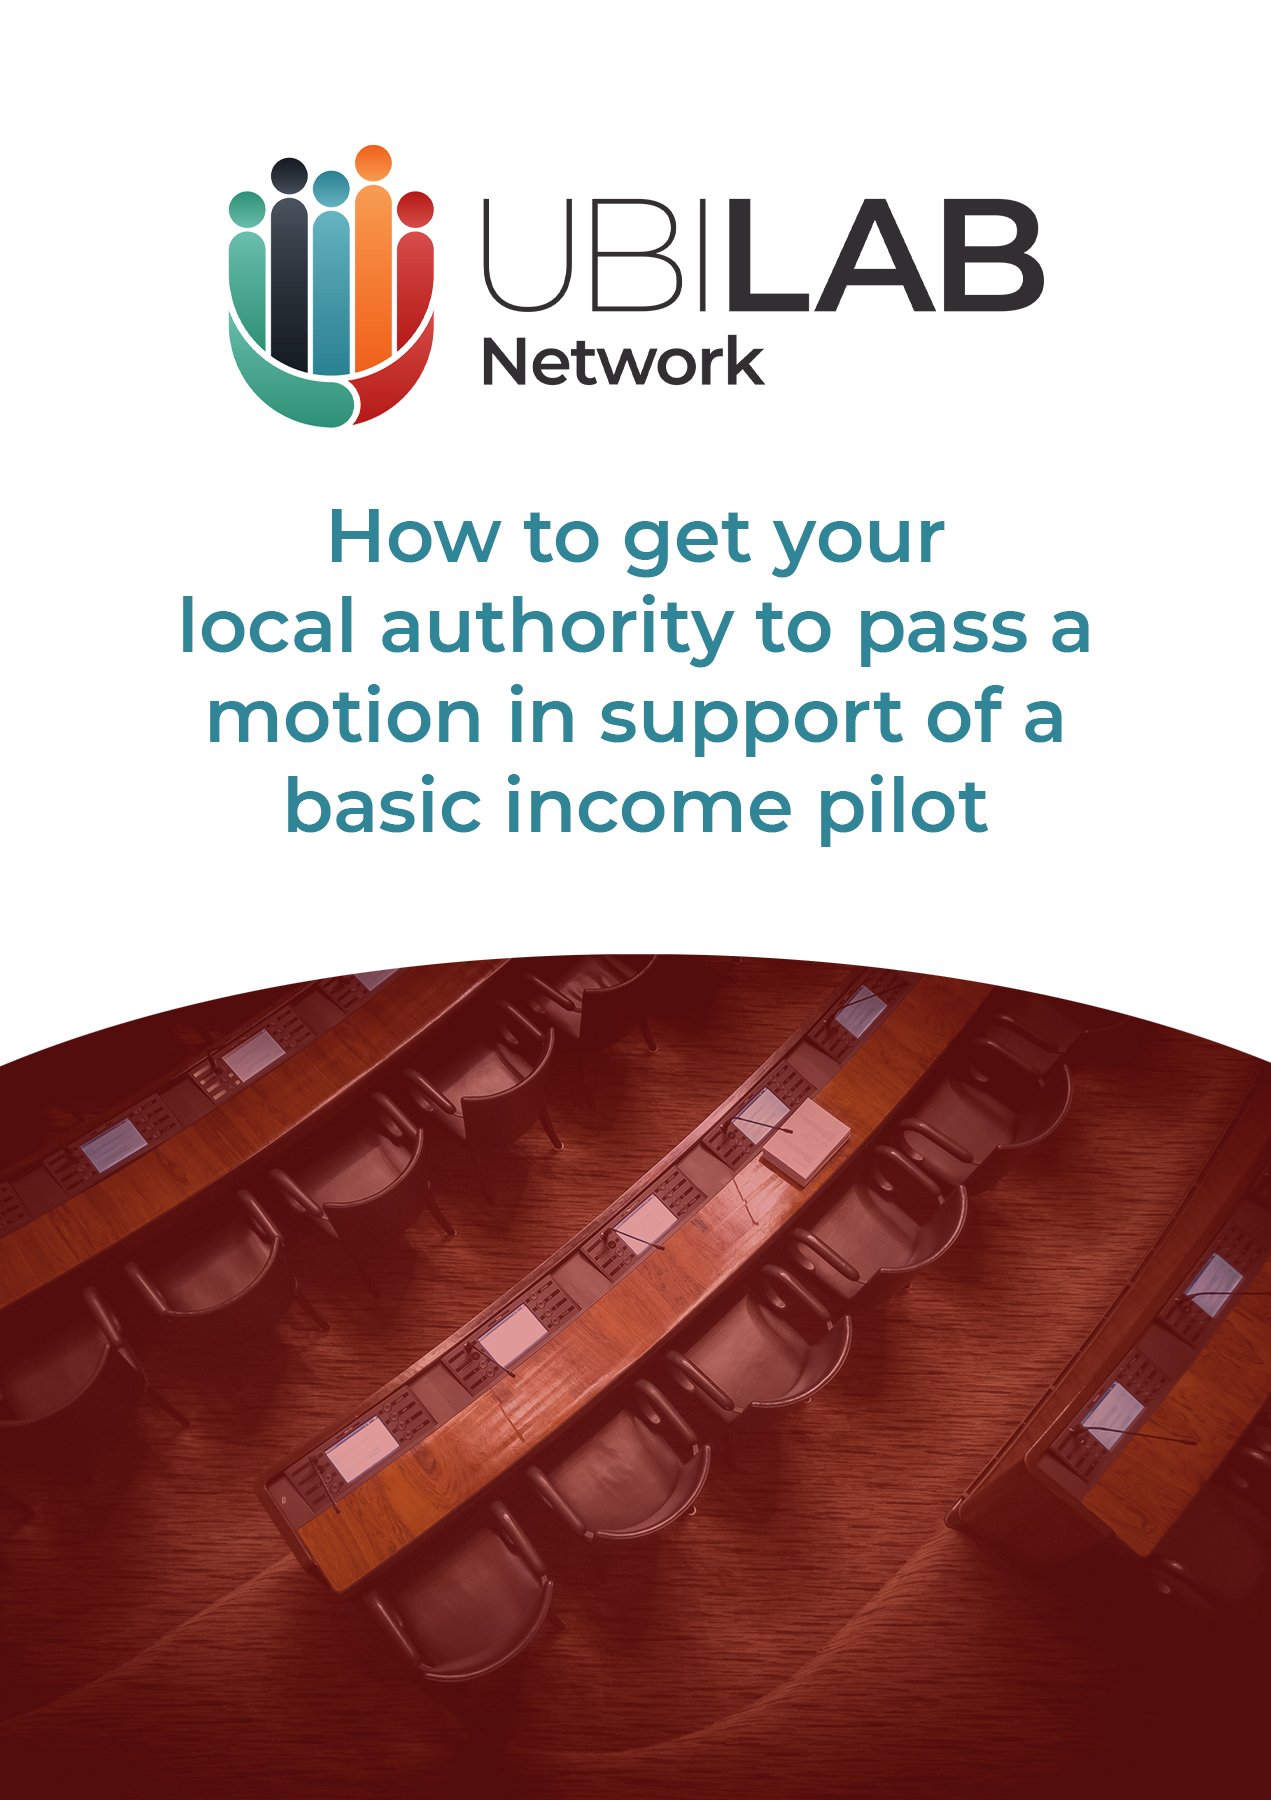 How to get your local authority to pass a motion in support of a basic income pilot (Copy)